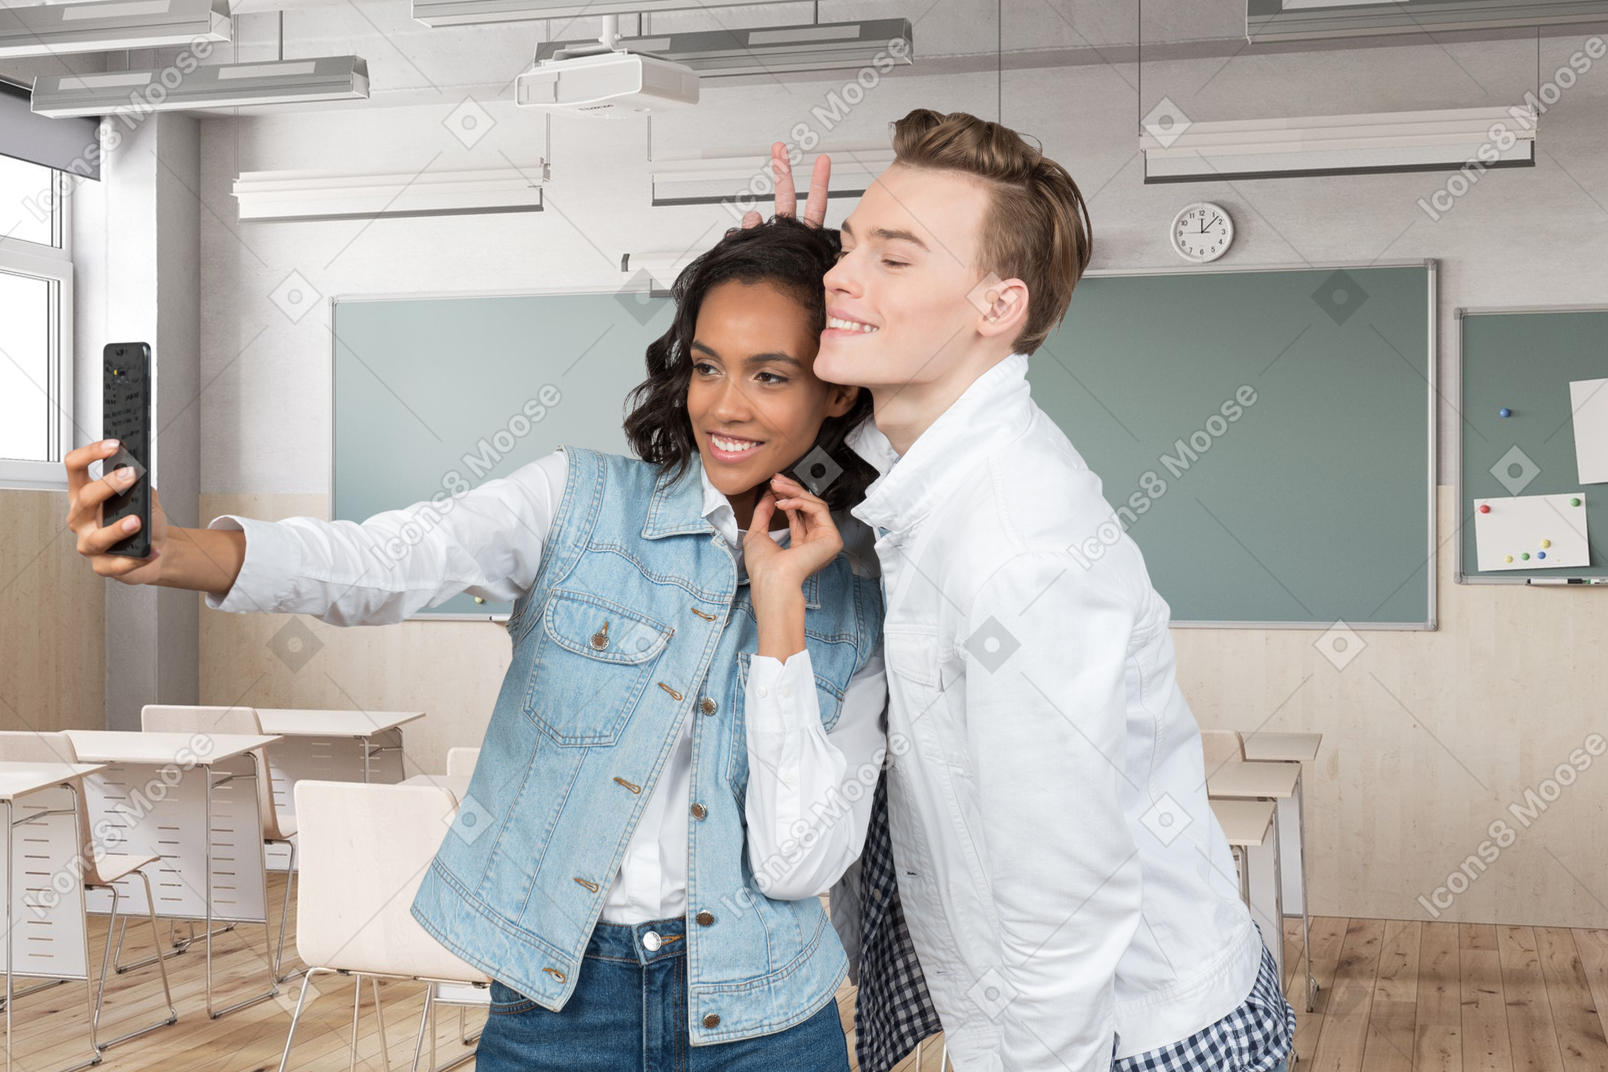 Two young people taking a selfie in a classroom